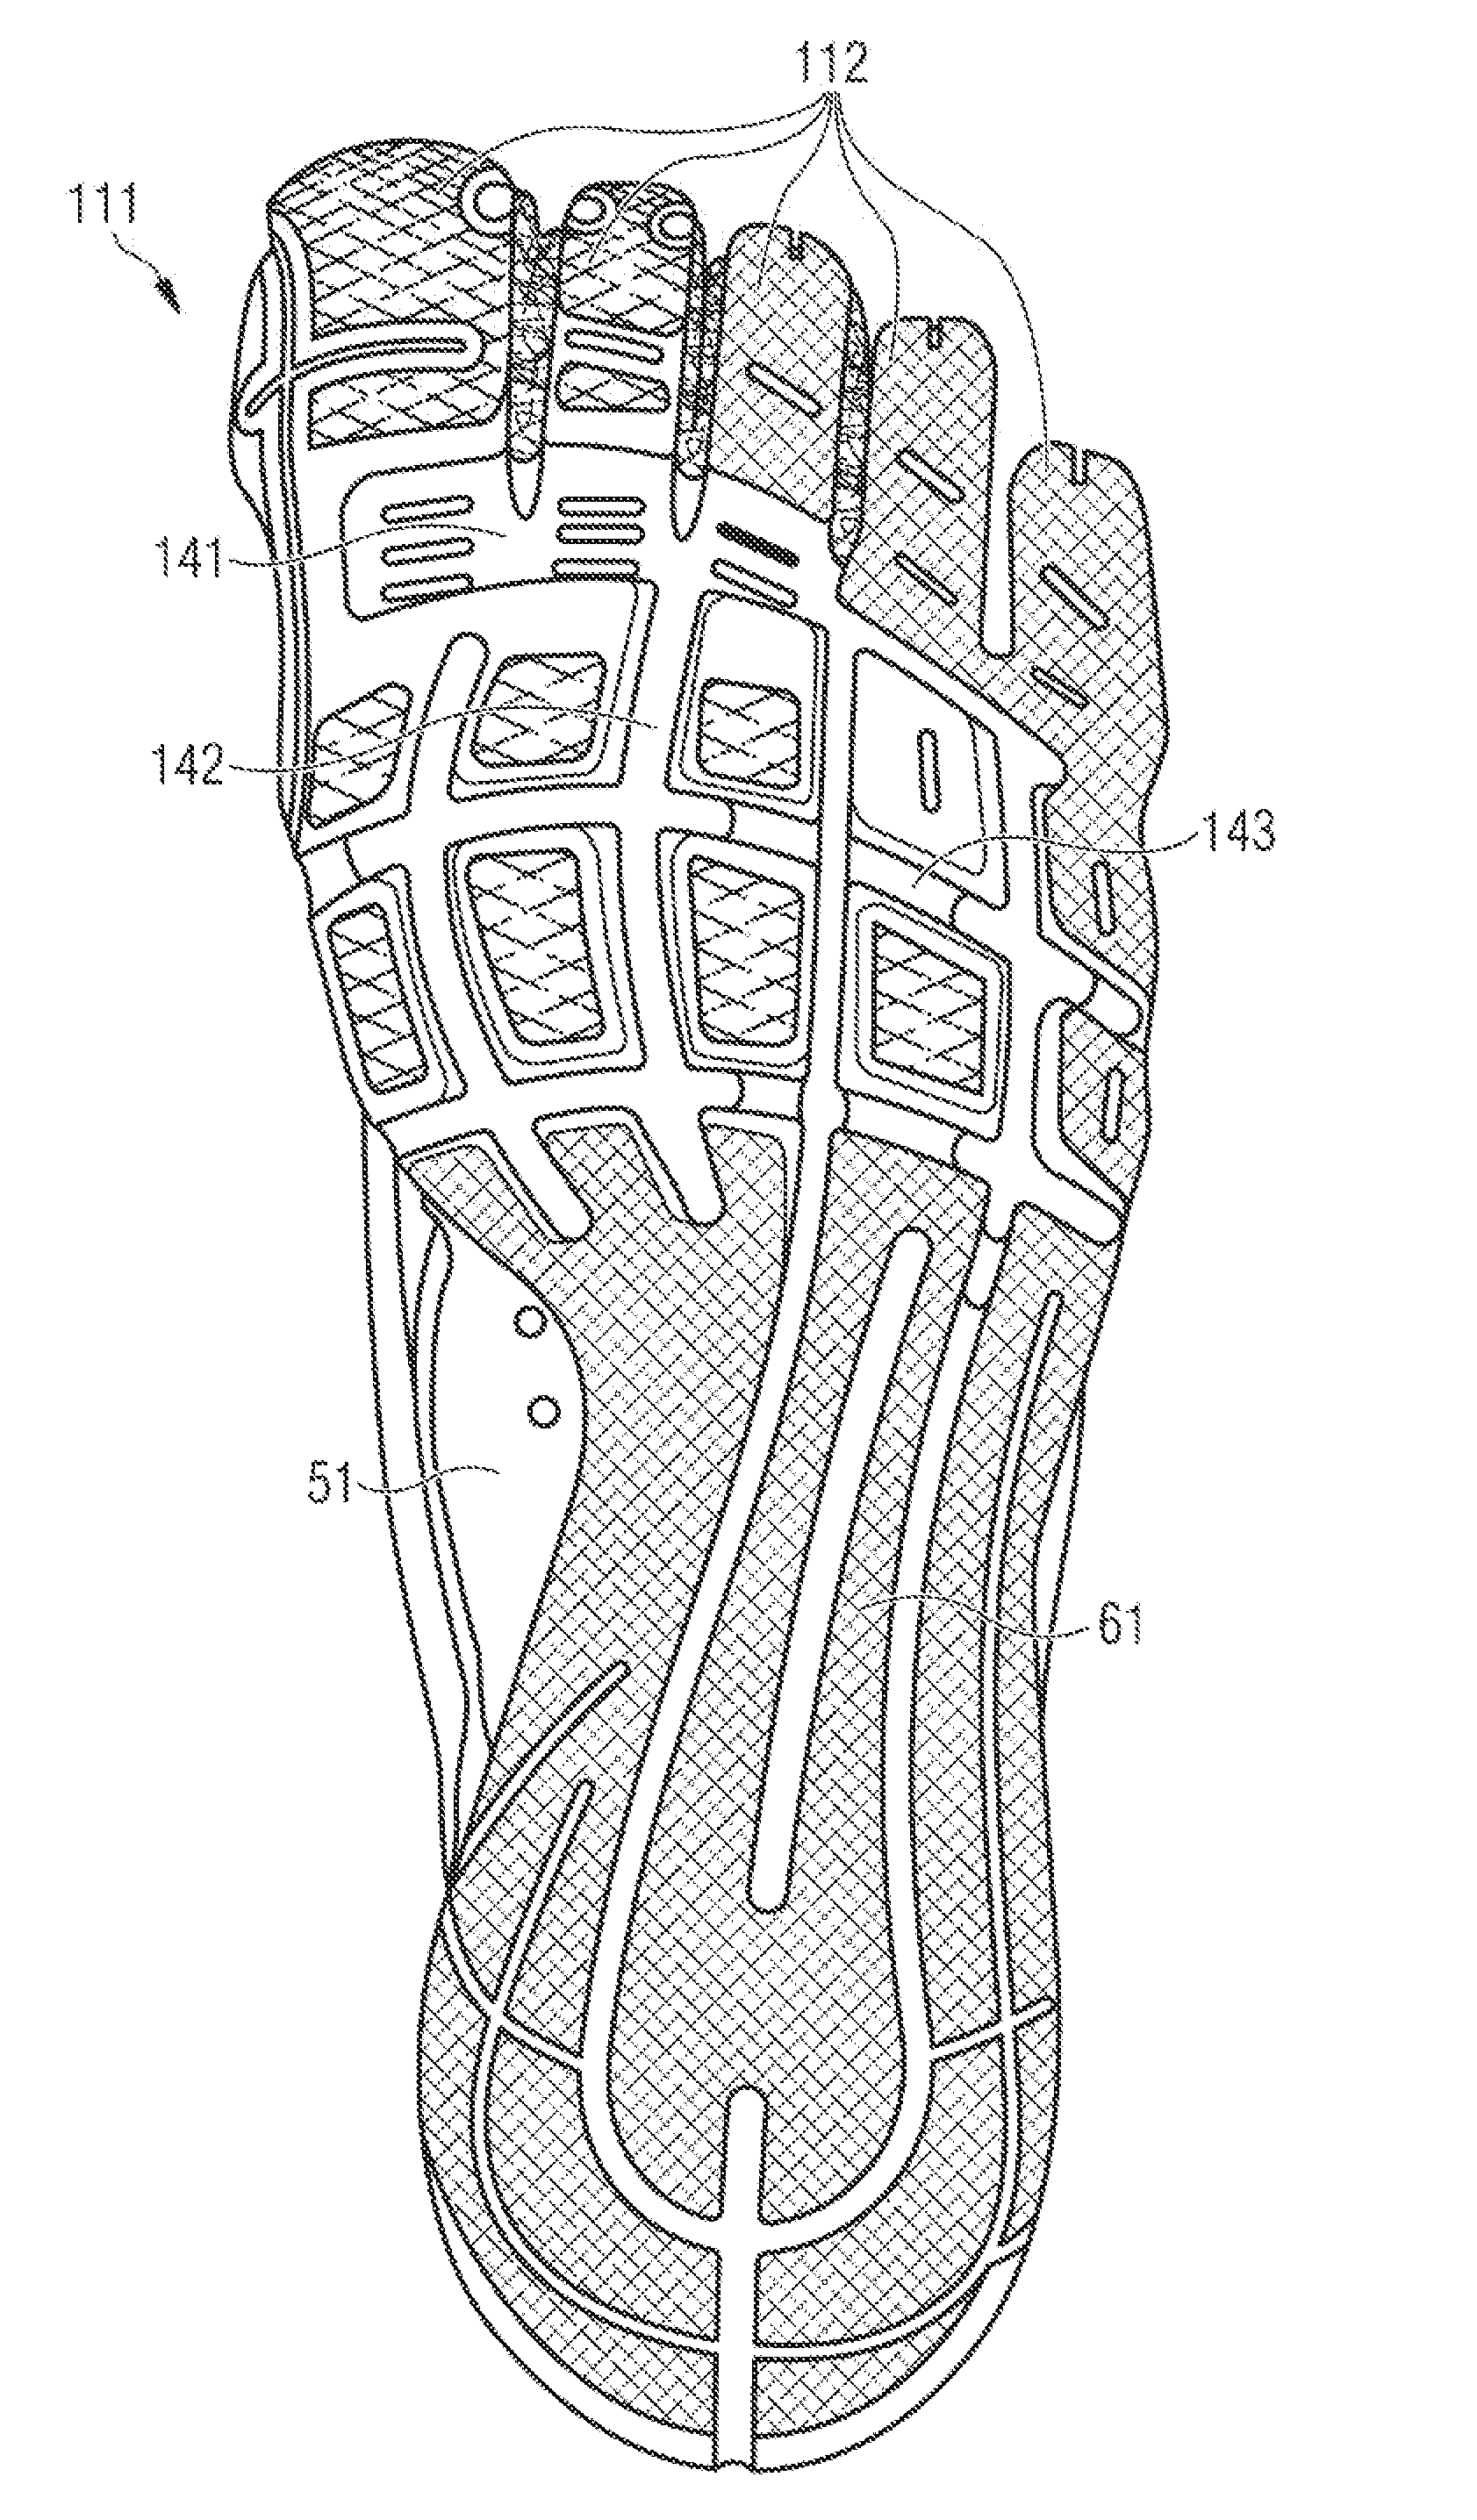 Shoe adapted to the shape of the foot